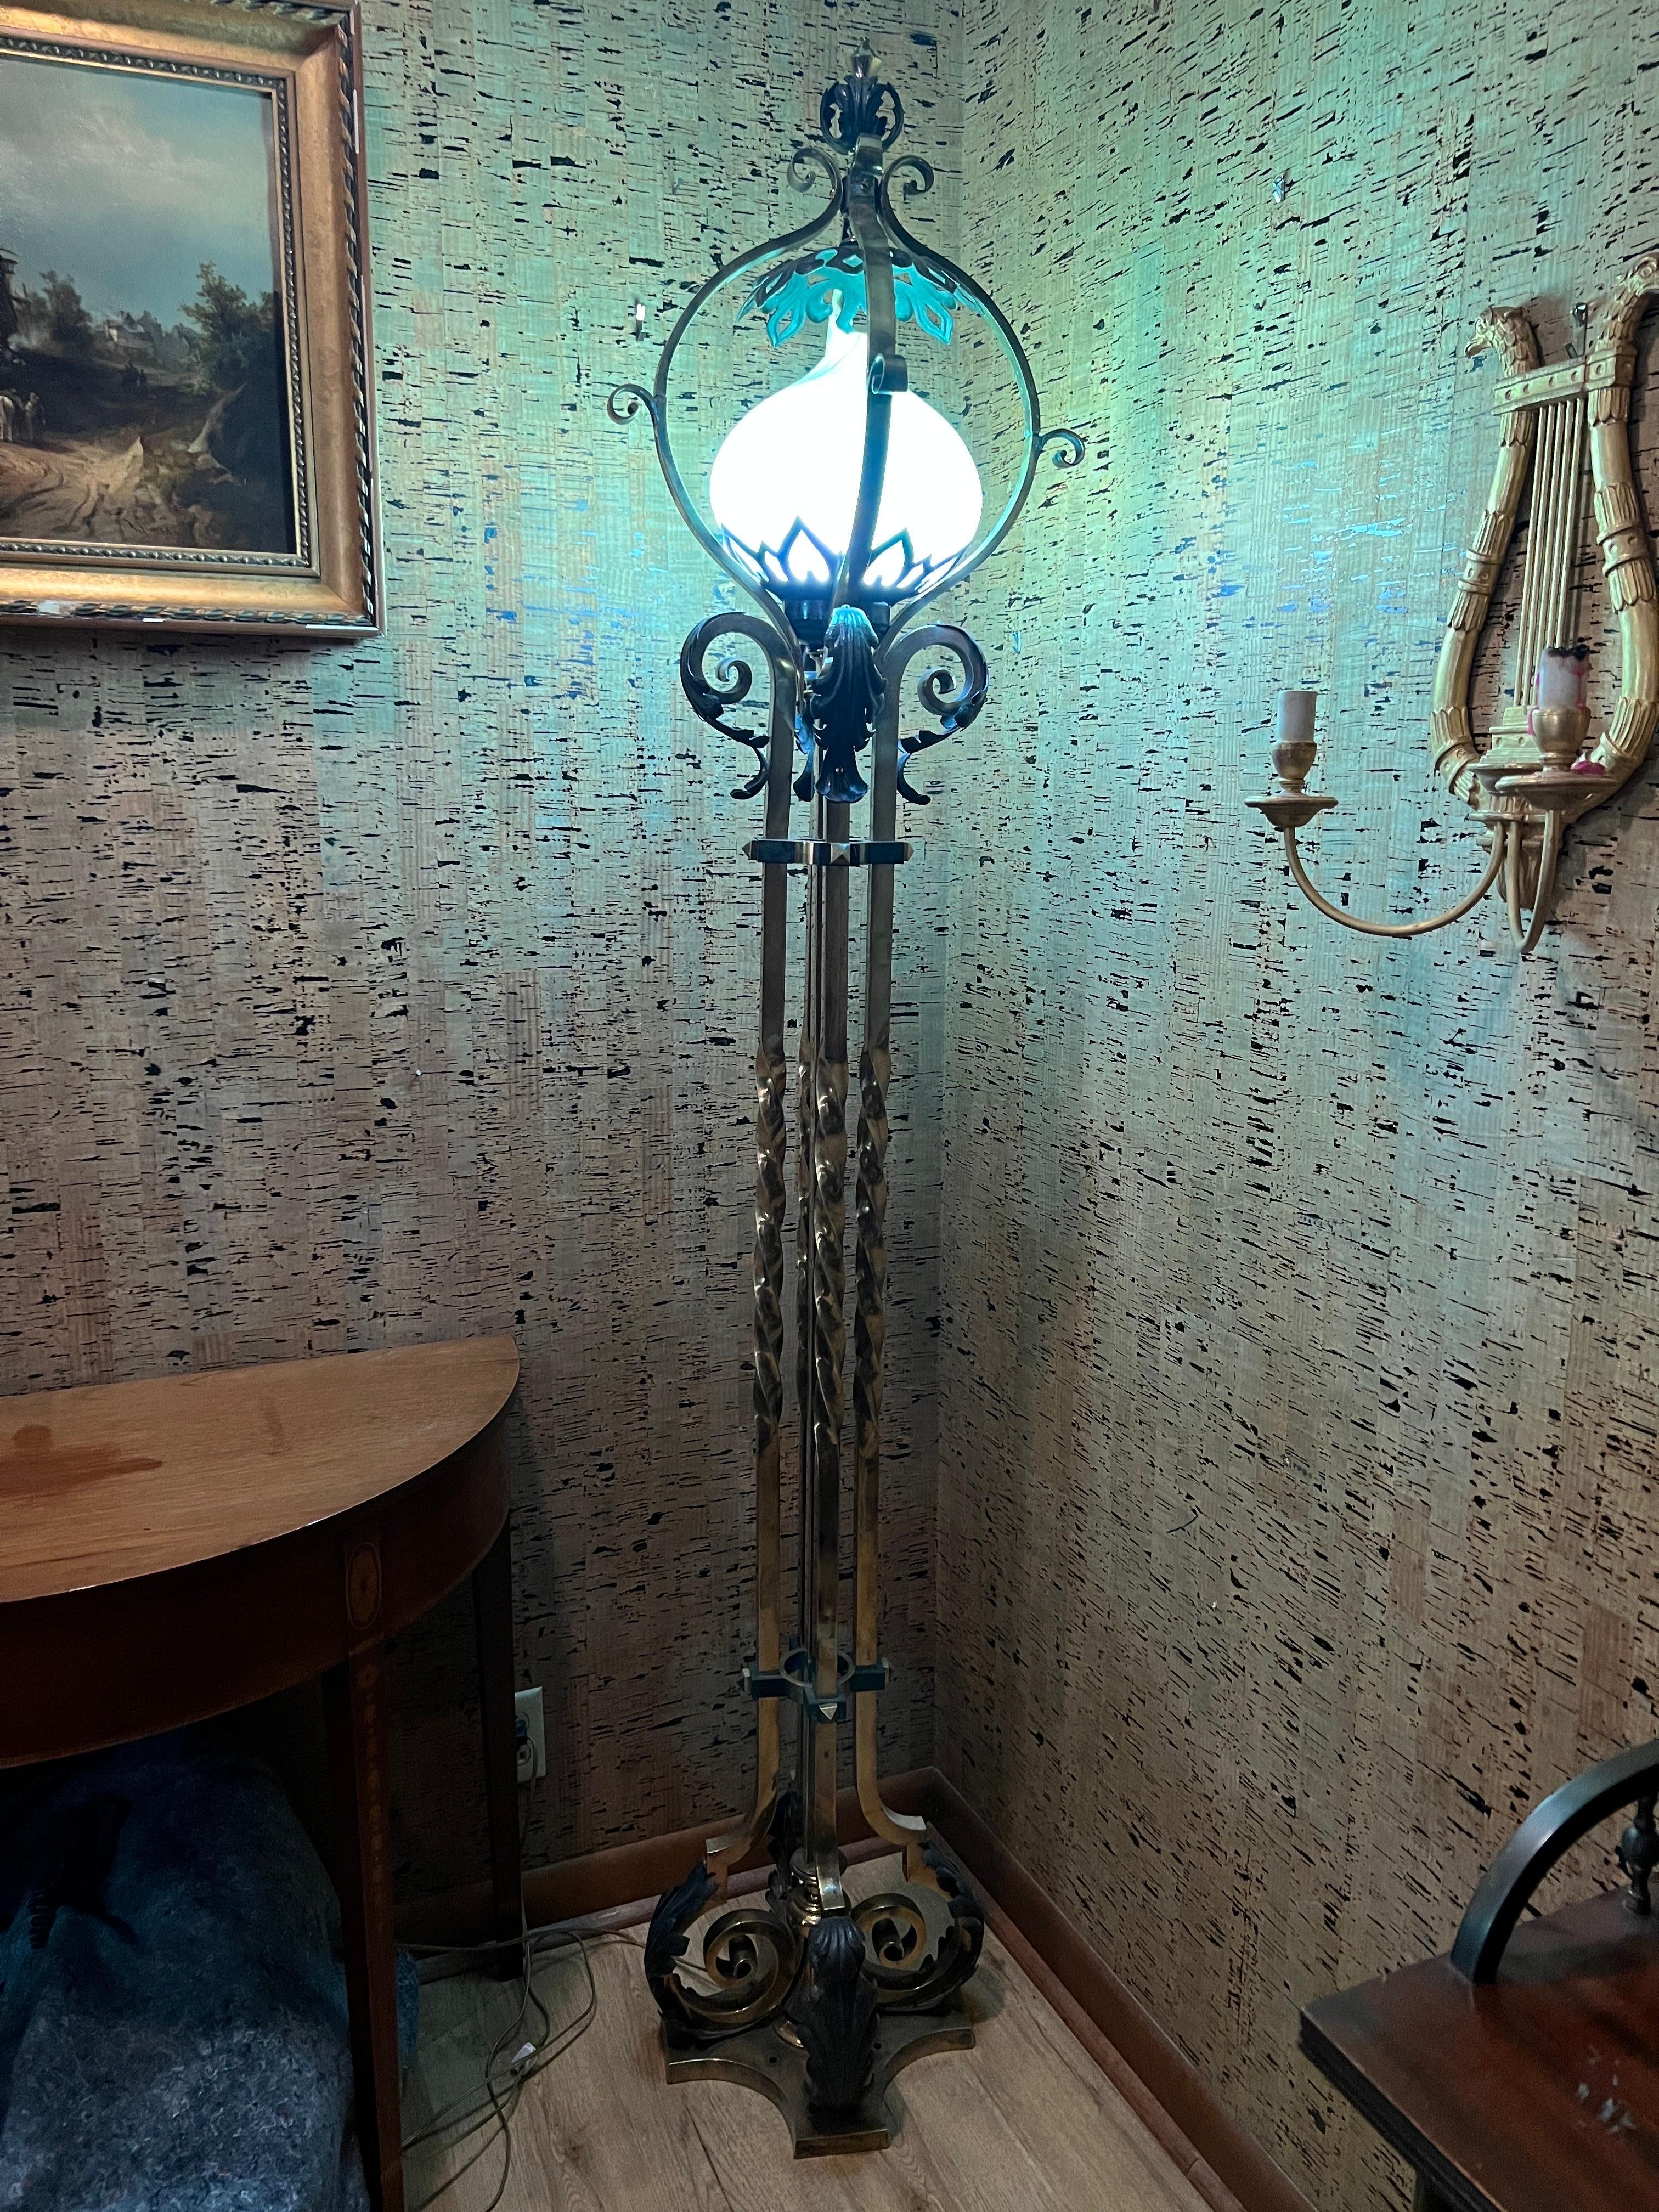 Pair, Magnificent 19th Century Bronze, Iron & Feather Pulled Floor Lamp Torchieres.

Likely Russian in original, possibly outdoor light posts from an important building. Extremely heavy gilt bronze bases with Neoclassical scroll work accented by